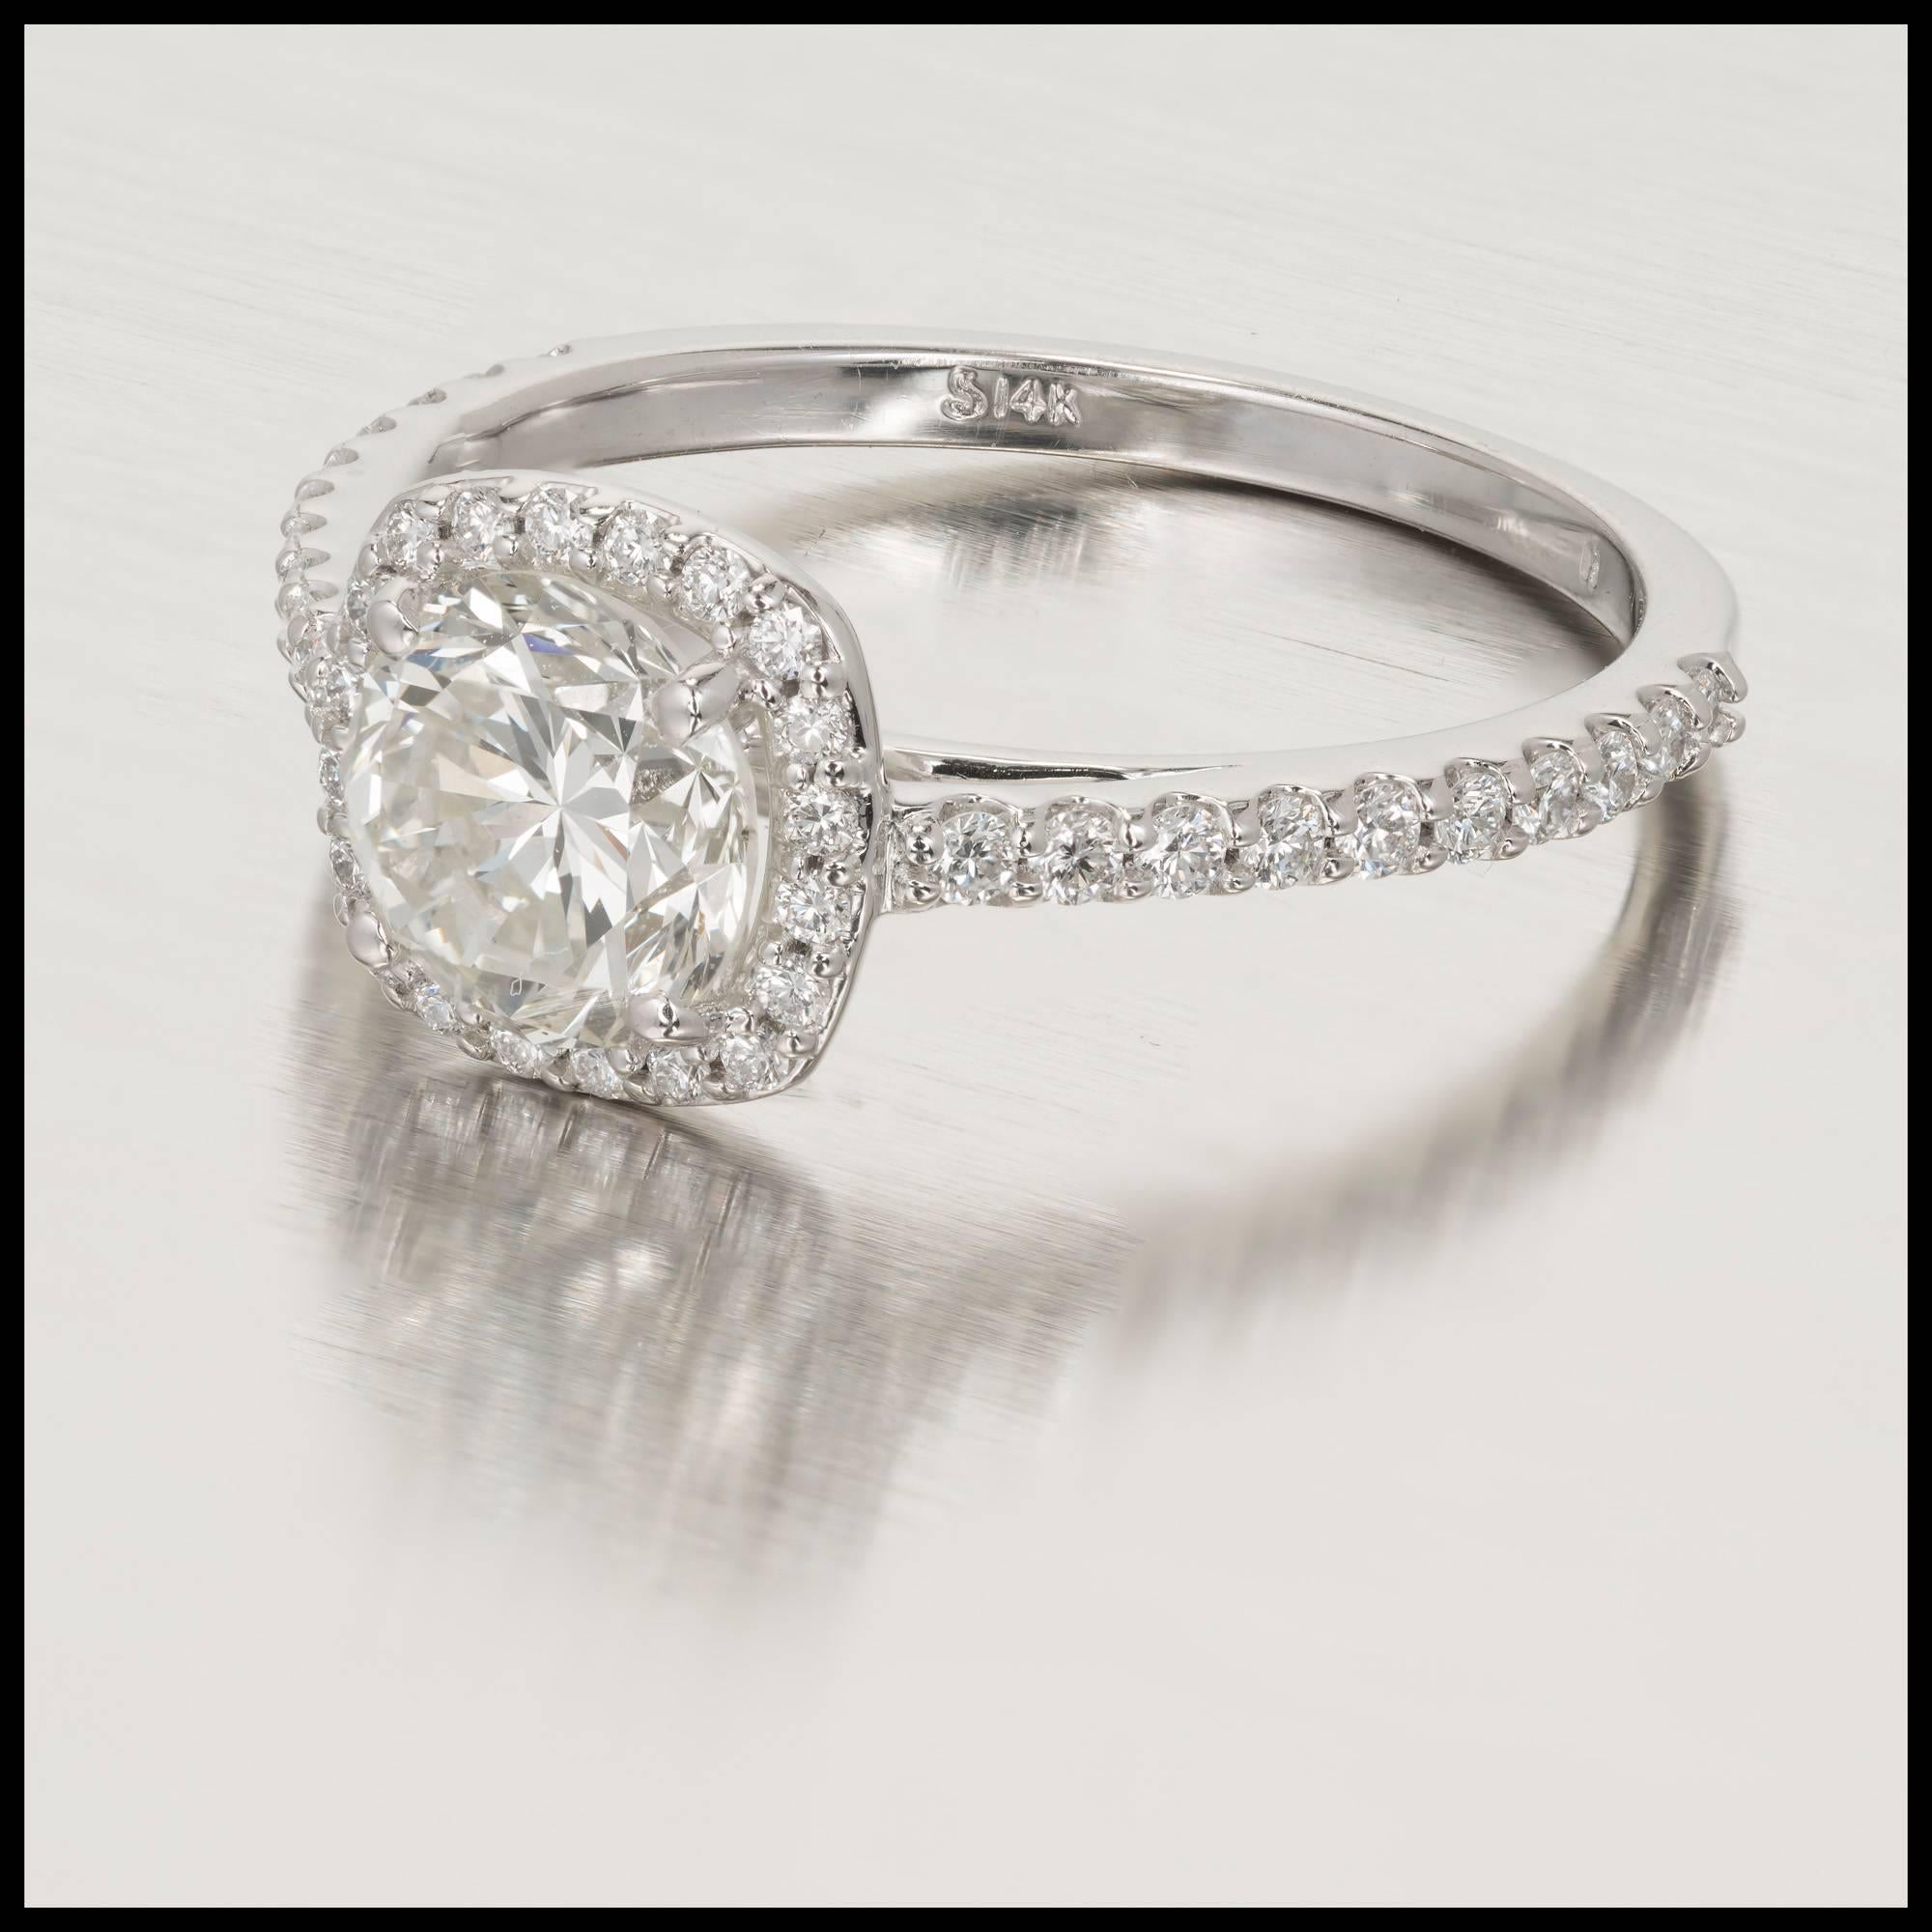 Peter Suchy cushion shape halo style engagement ring set with a bright transitional cut Diamond round center and bright white full cut Diamonds around. The ring is designed to fit flush next to a wedding band.  EGL certified.

1 round transitional